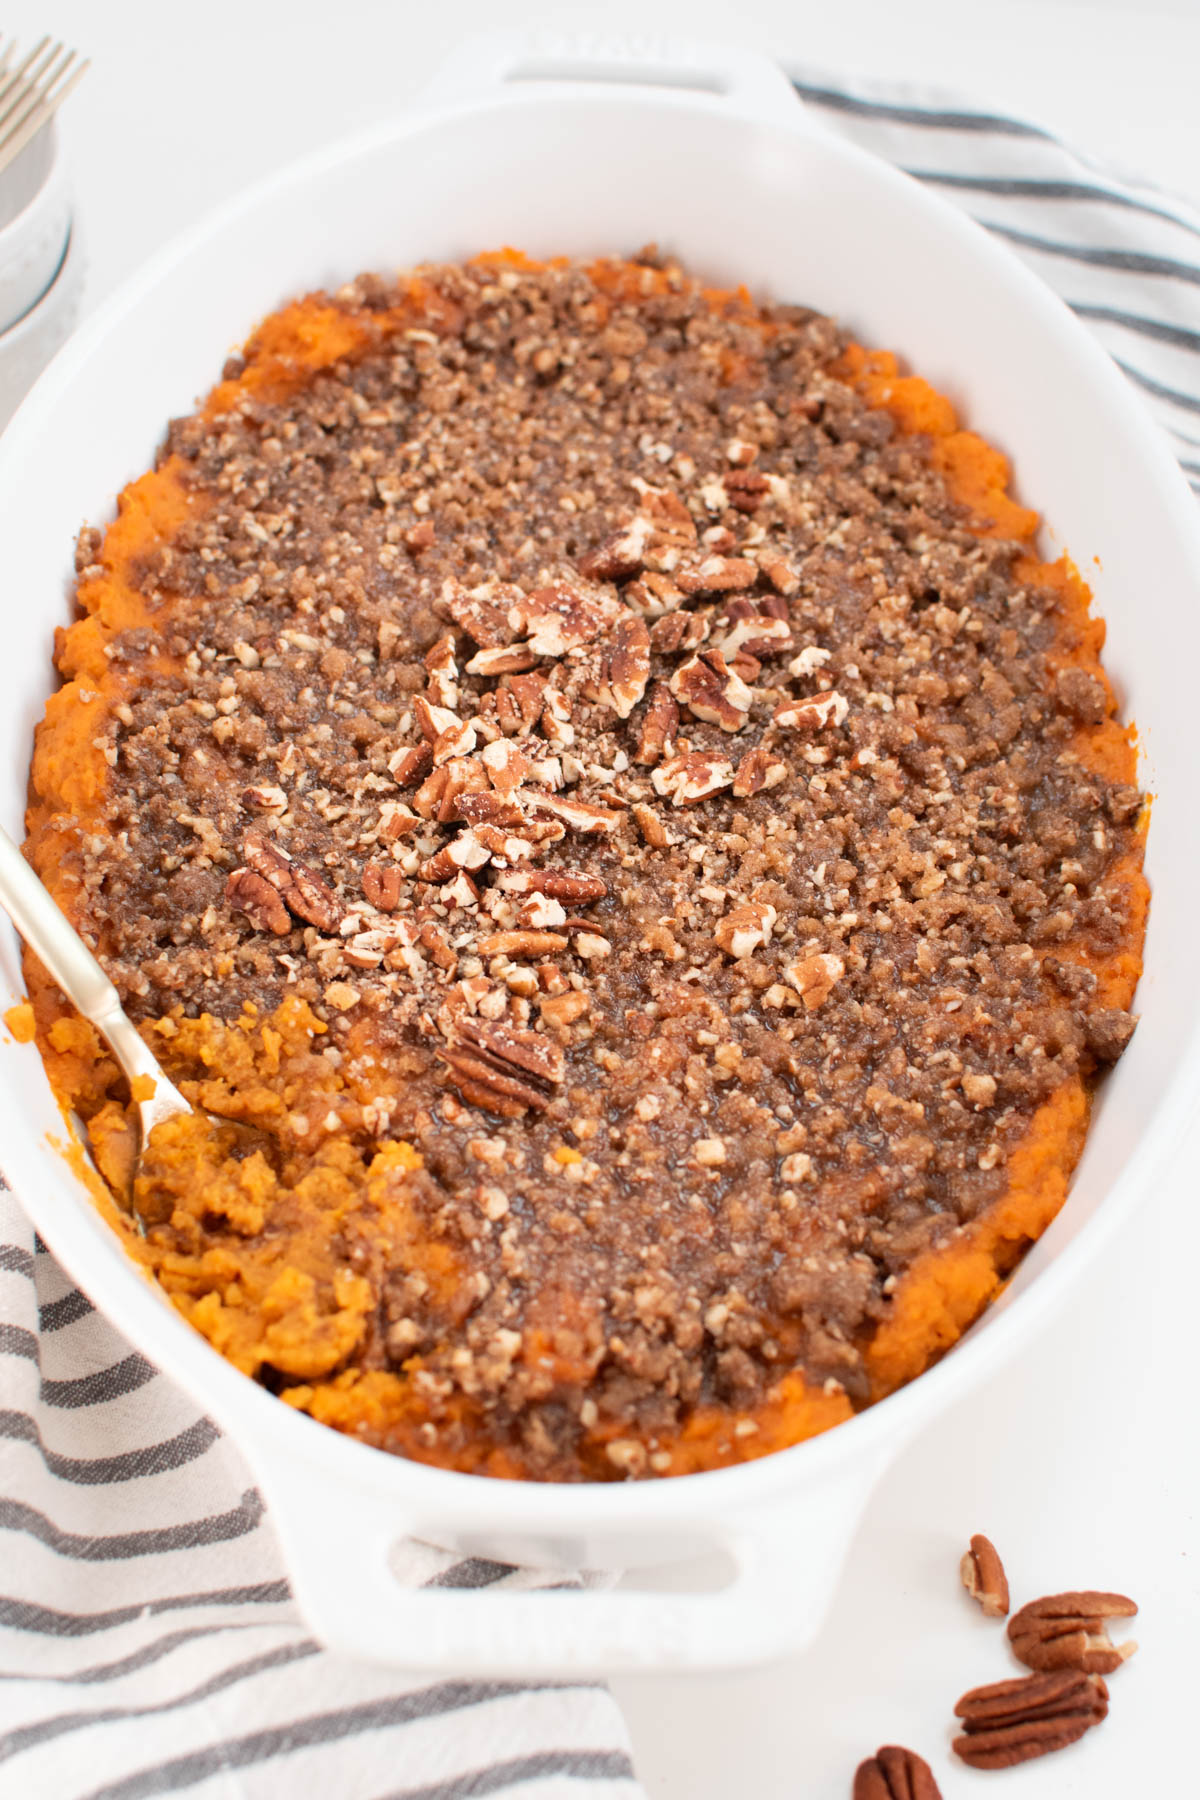 Sweet potato crunch casserole in white baking dish with gold spoon resting inside of casserole.